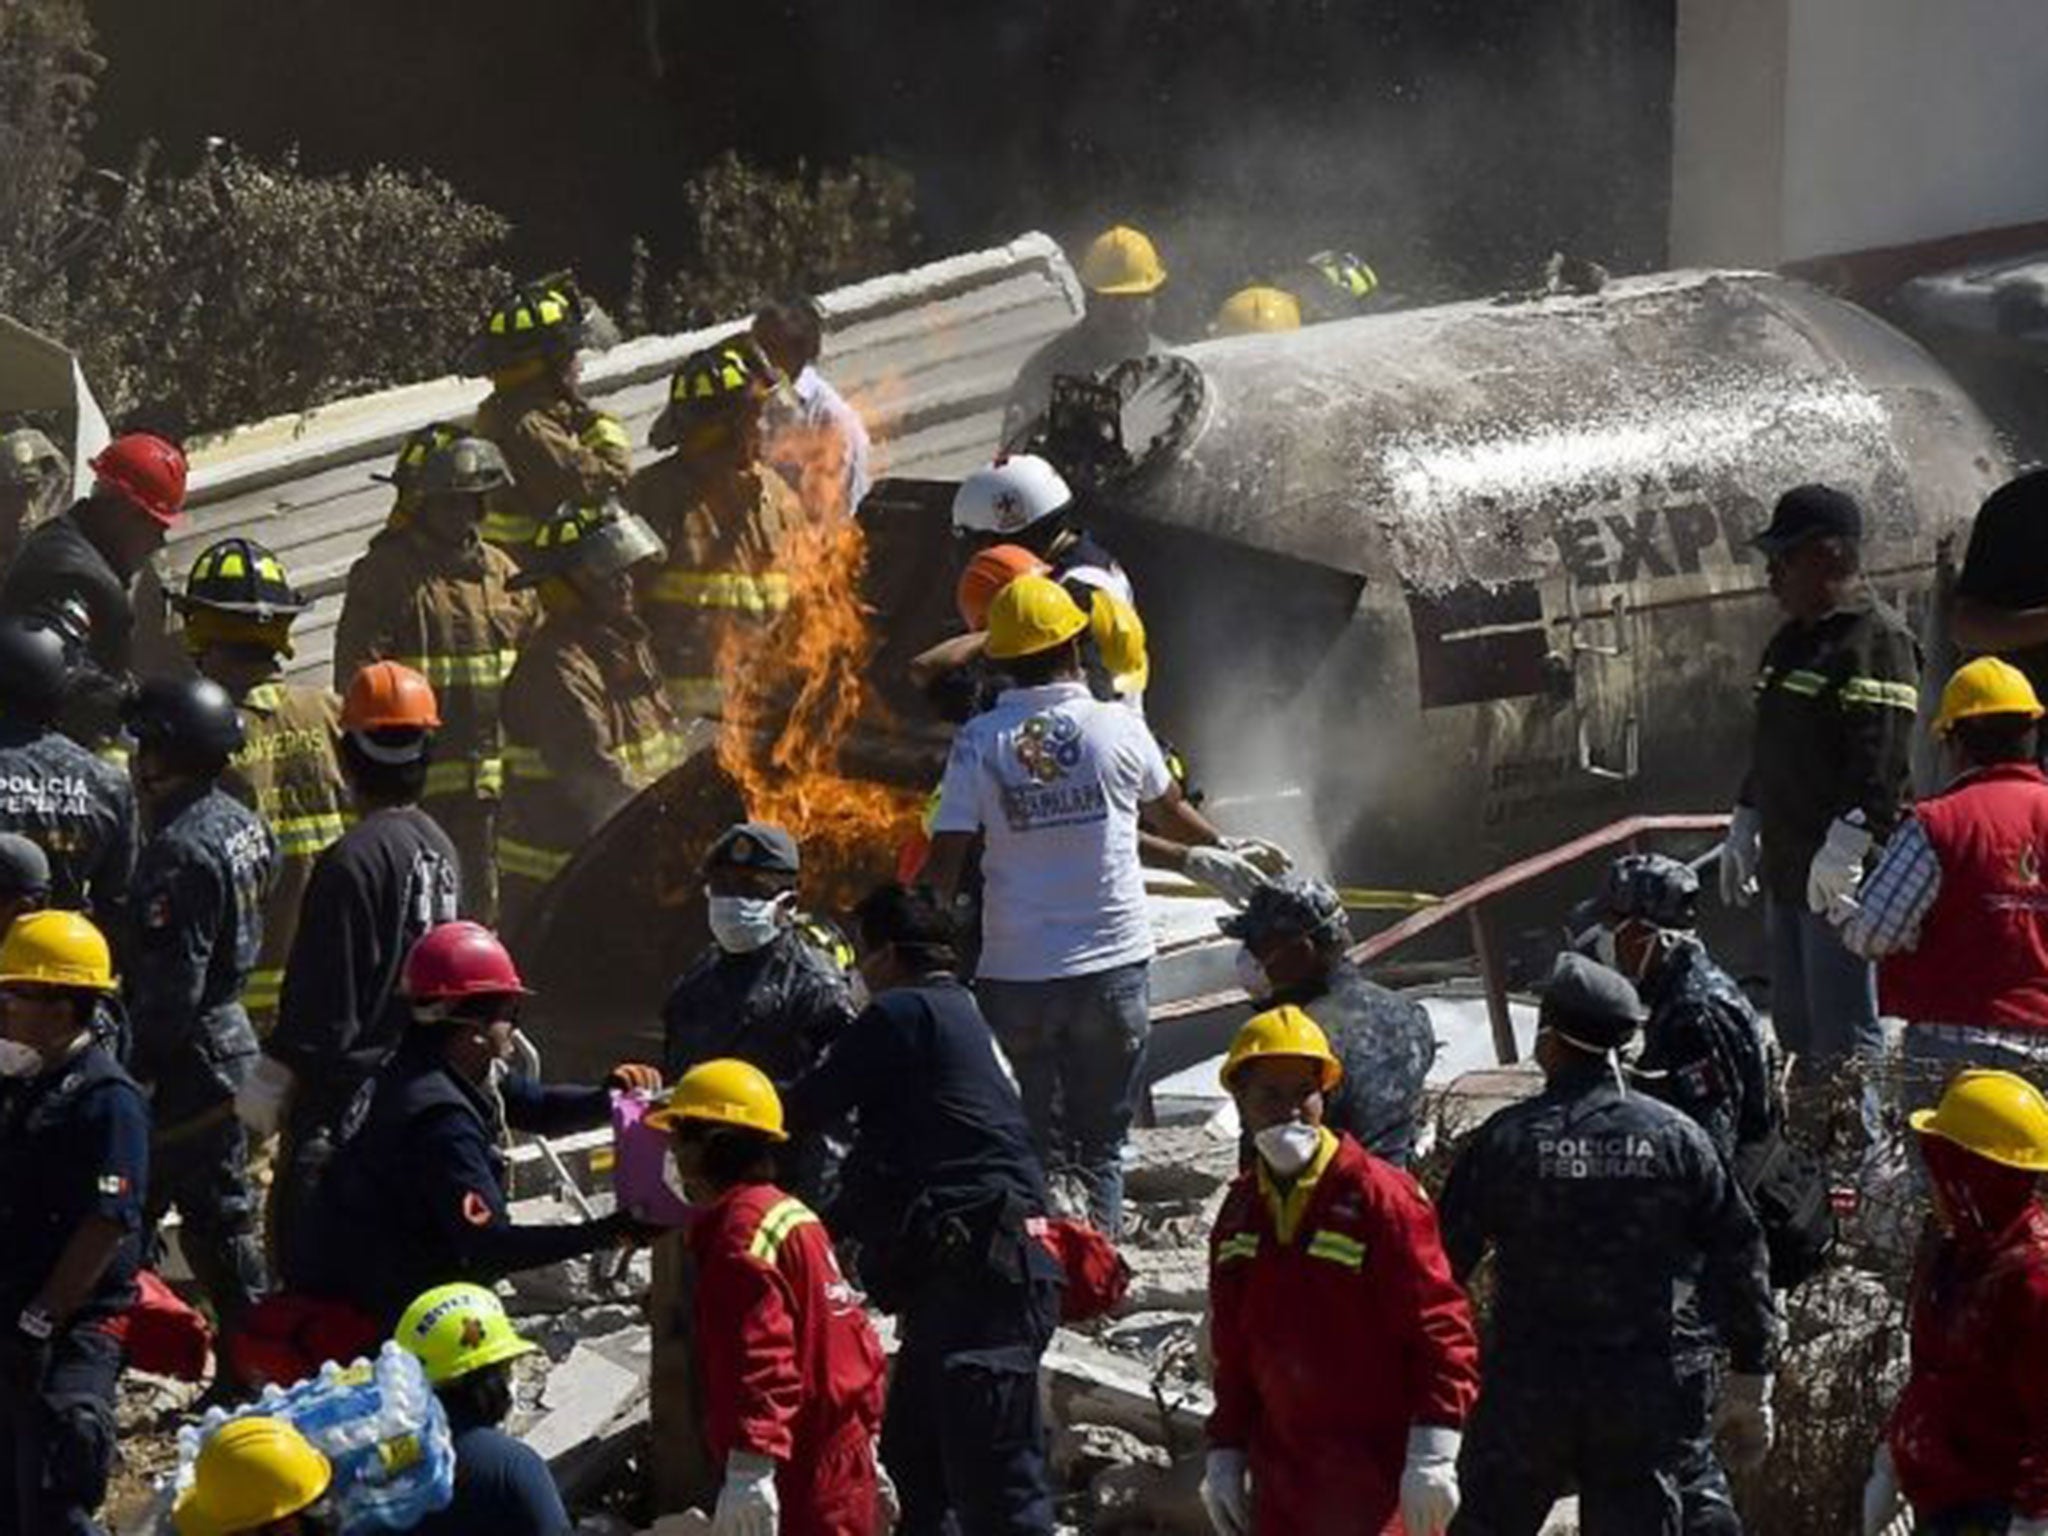 Rescuers work amid the wreckage caused by an explosion in a hospital in Cuajimalpa, Mexico City